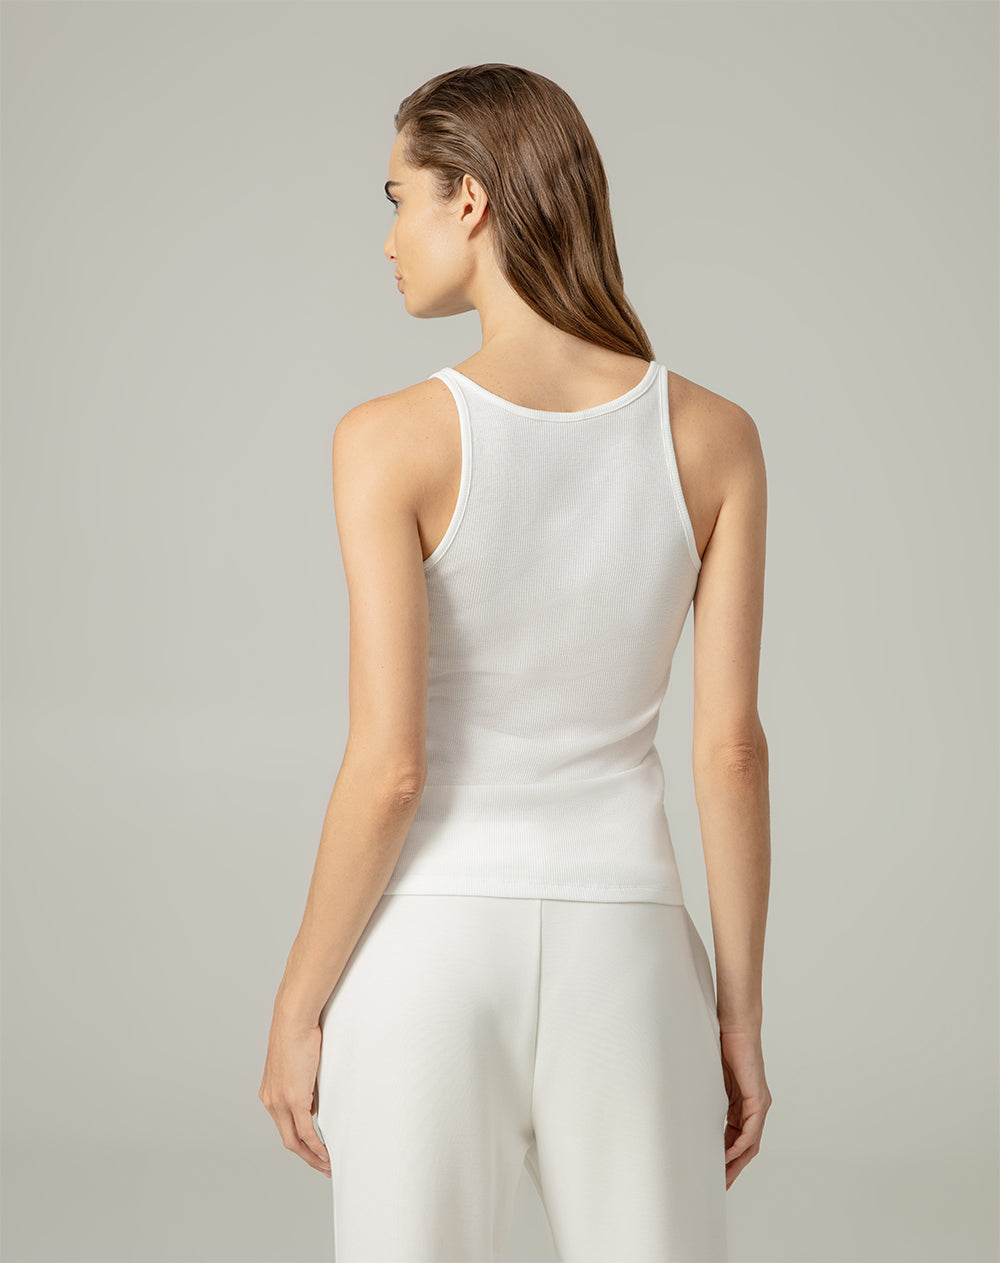 Camiseta relaxed fit blanca